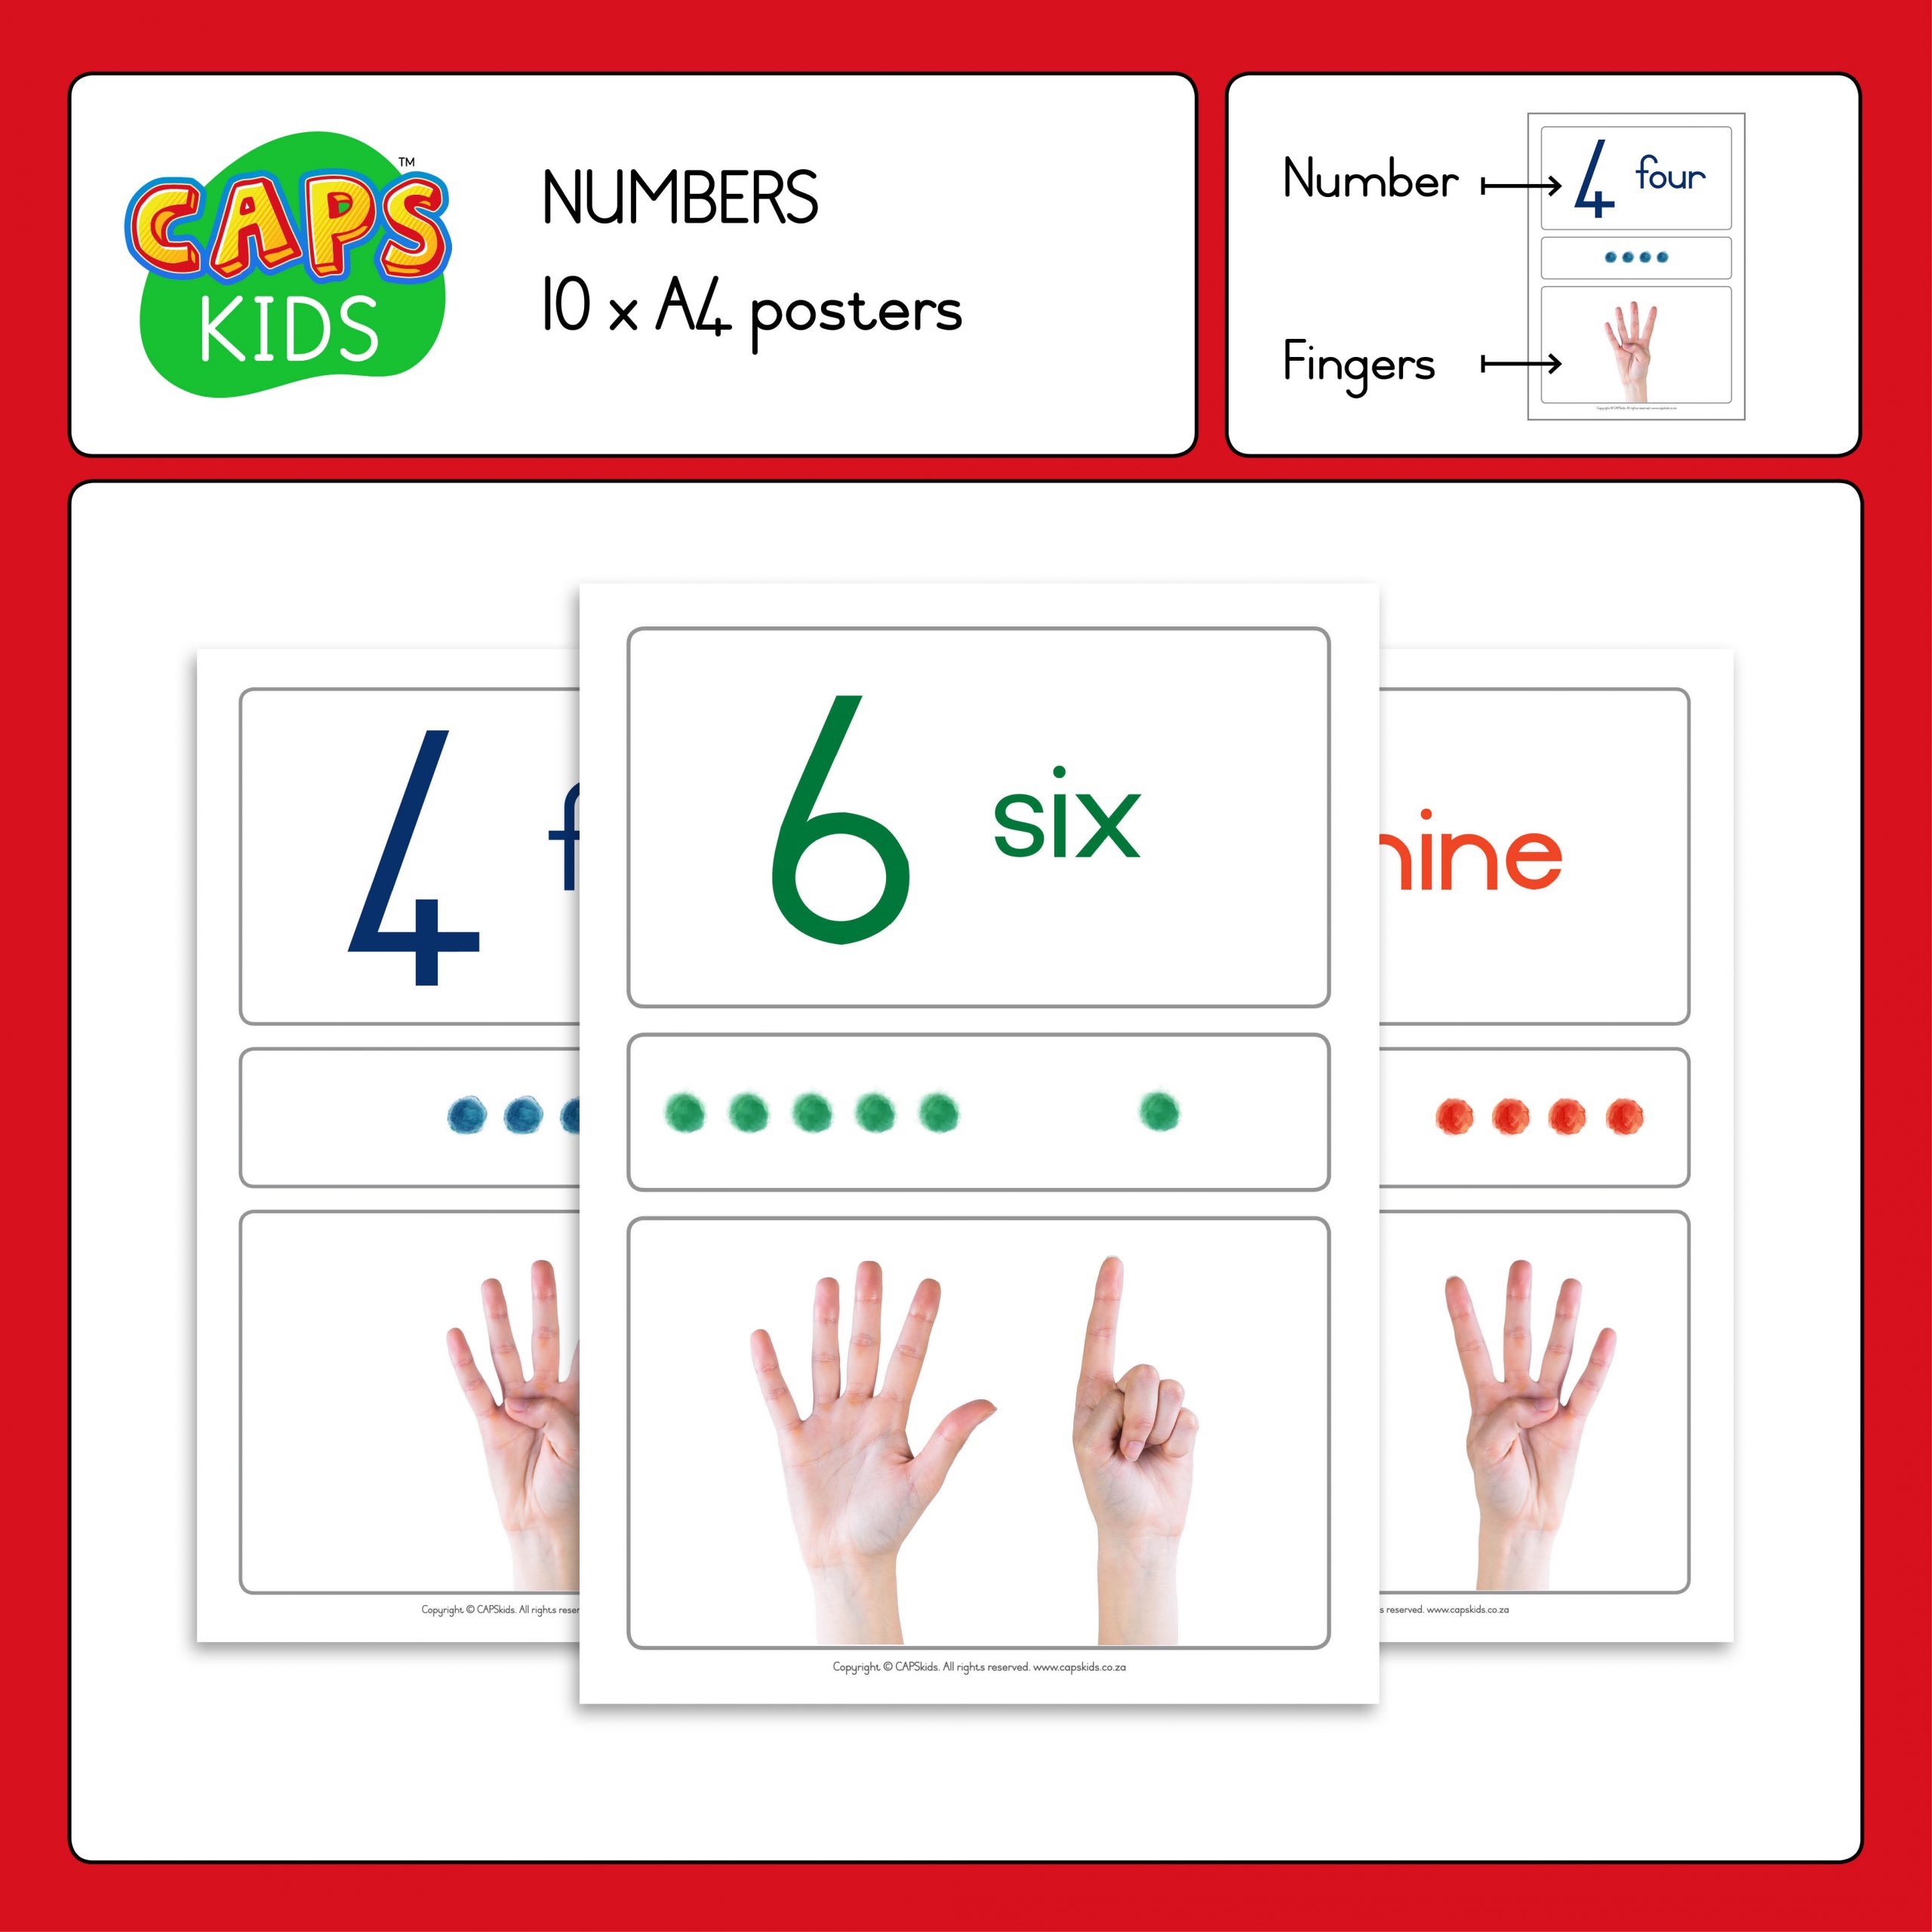 CAPSkids A4 Posters with English numbers